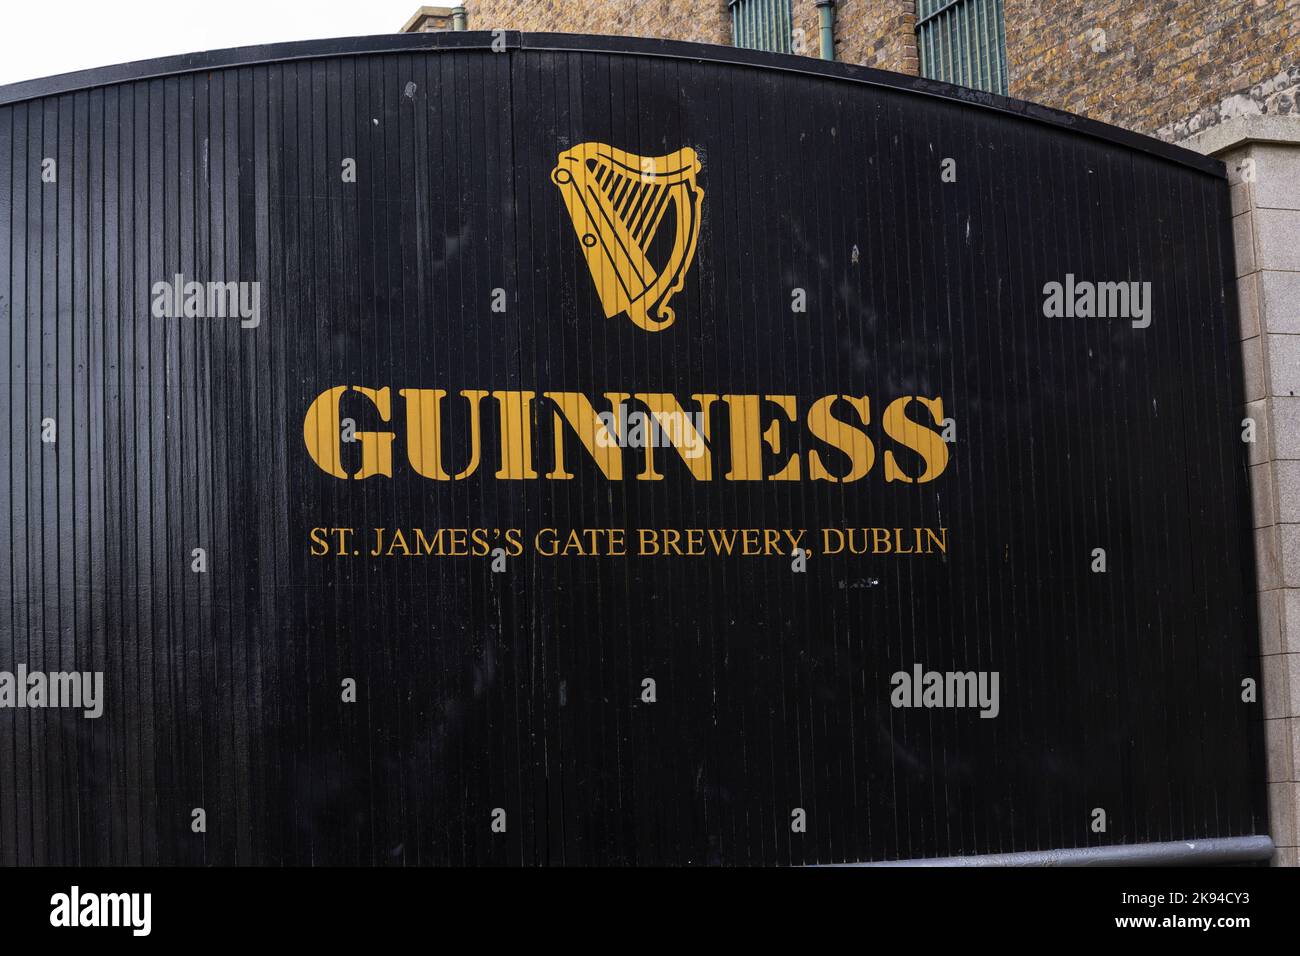 Ireland Eire Dublin St James's Gate Guinness Storehouse beer stout porter black ale built 1904 started 1759 iconic St James's Gate entrance to works Stock Photo